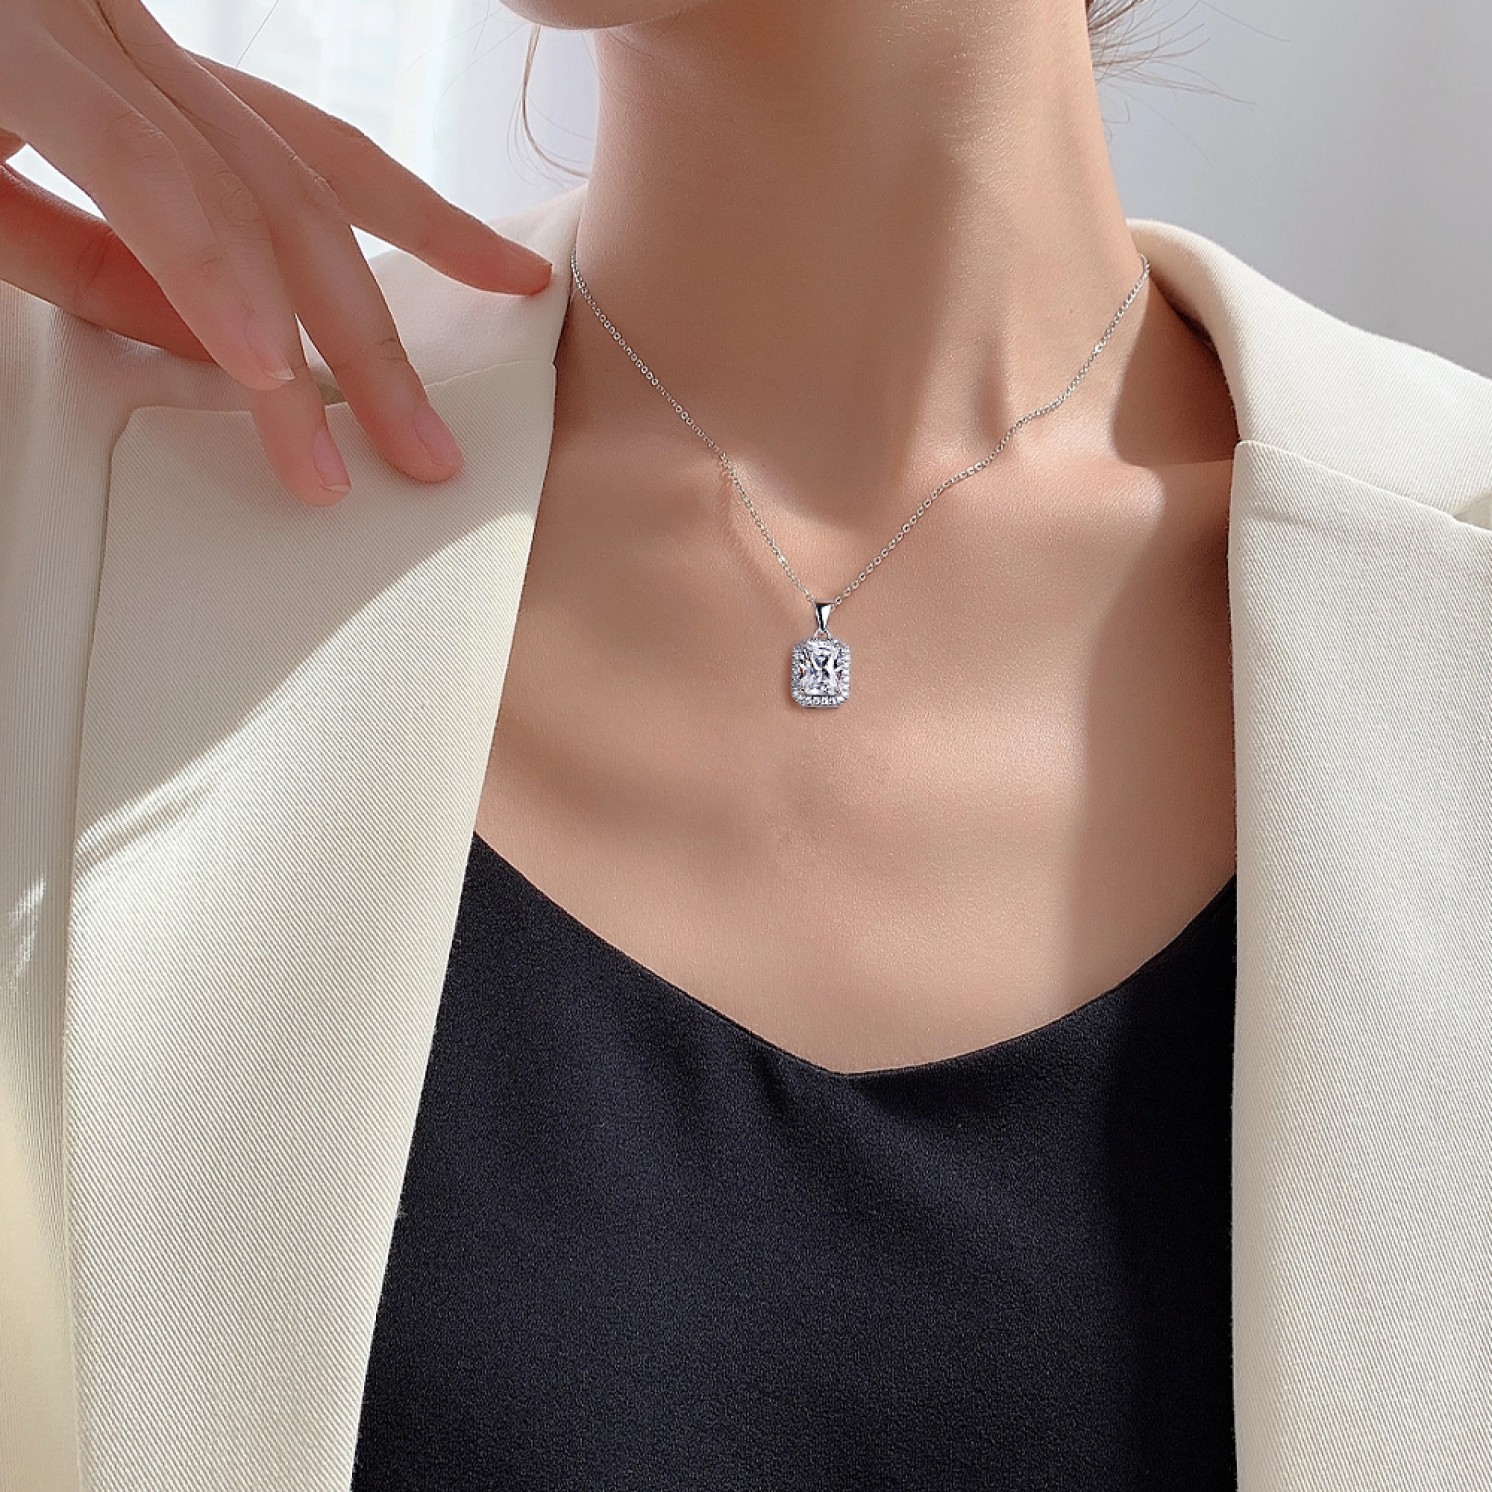 Gemina – Radiant Cut Moissanite Pendant in a Paved Halo Setting